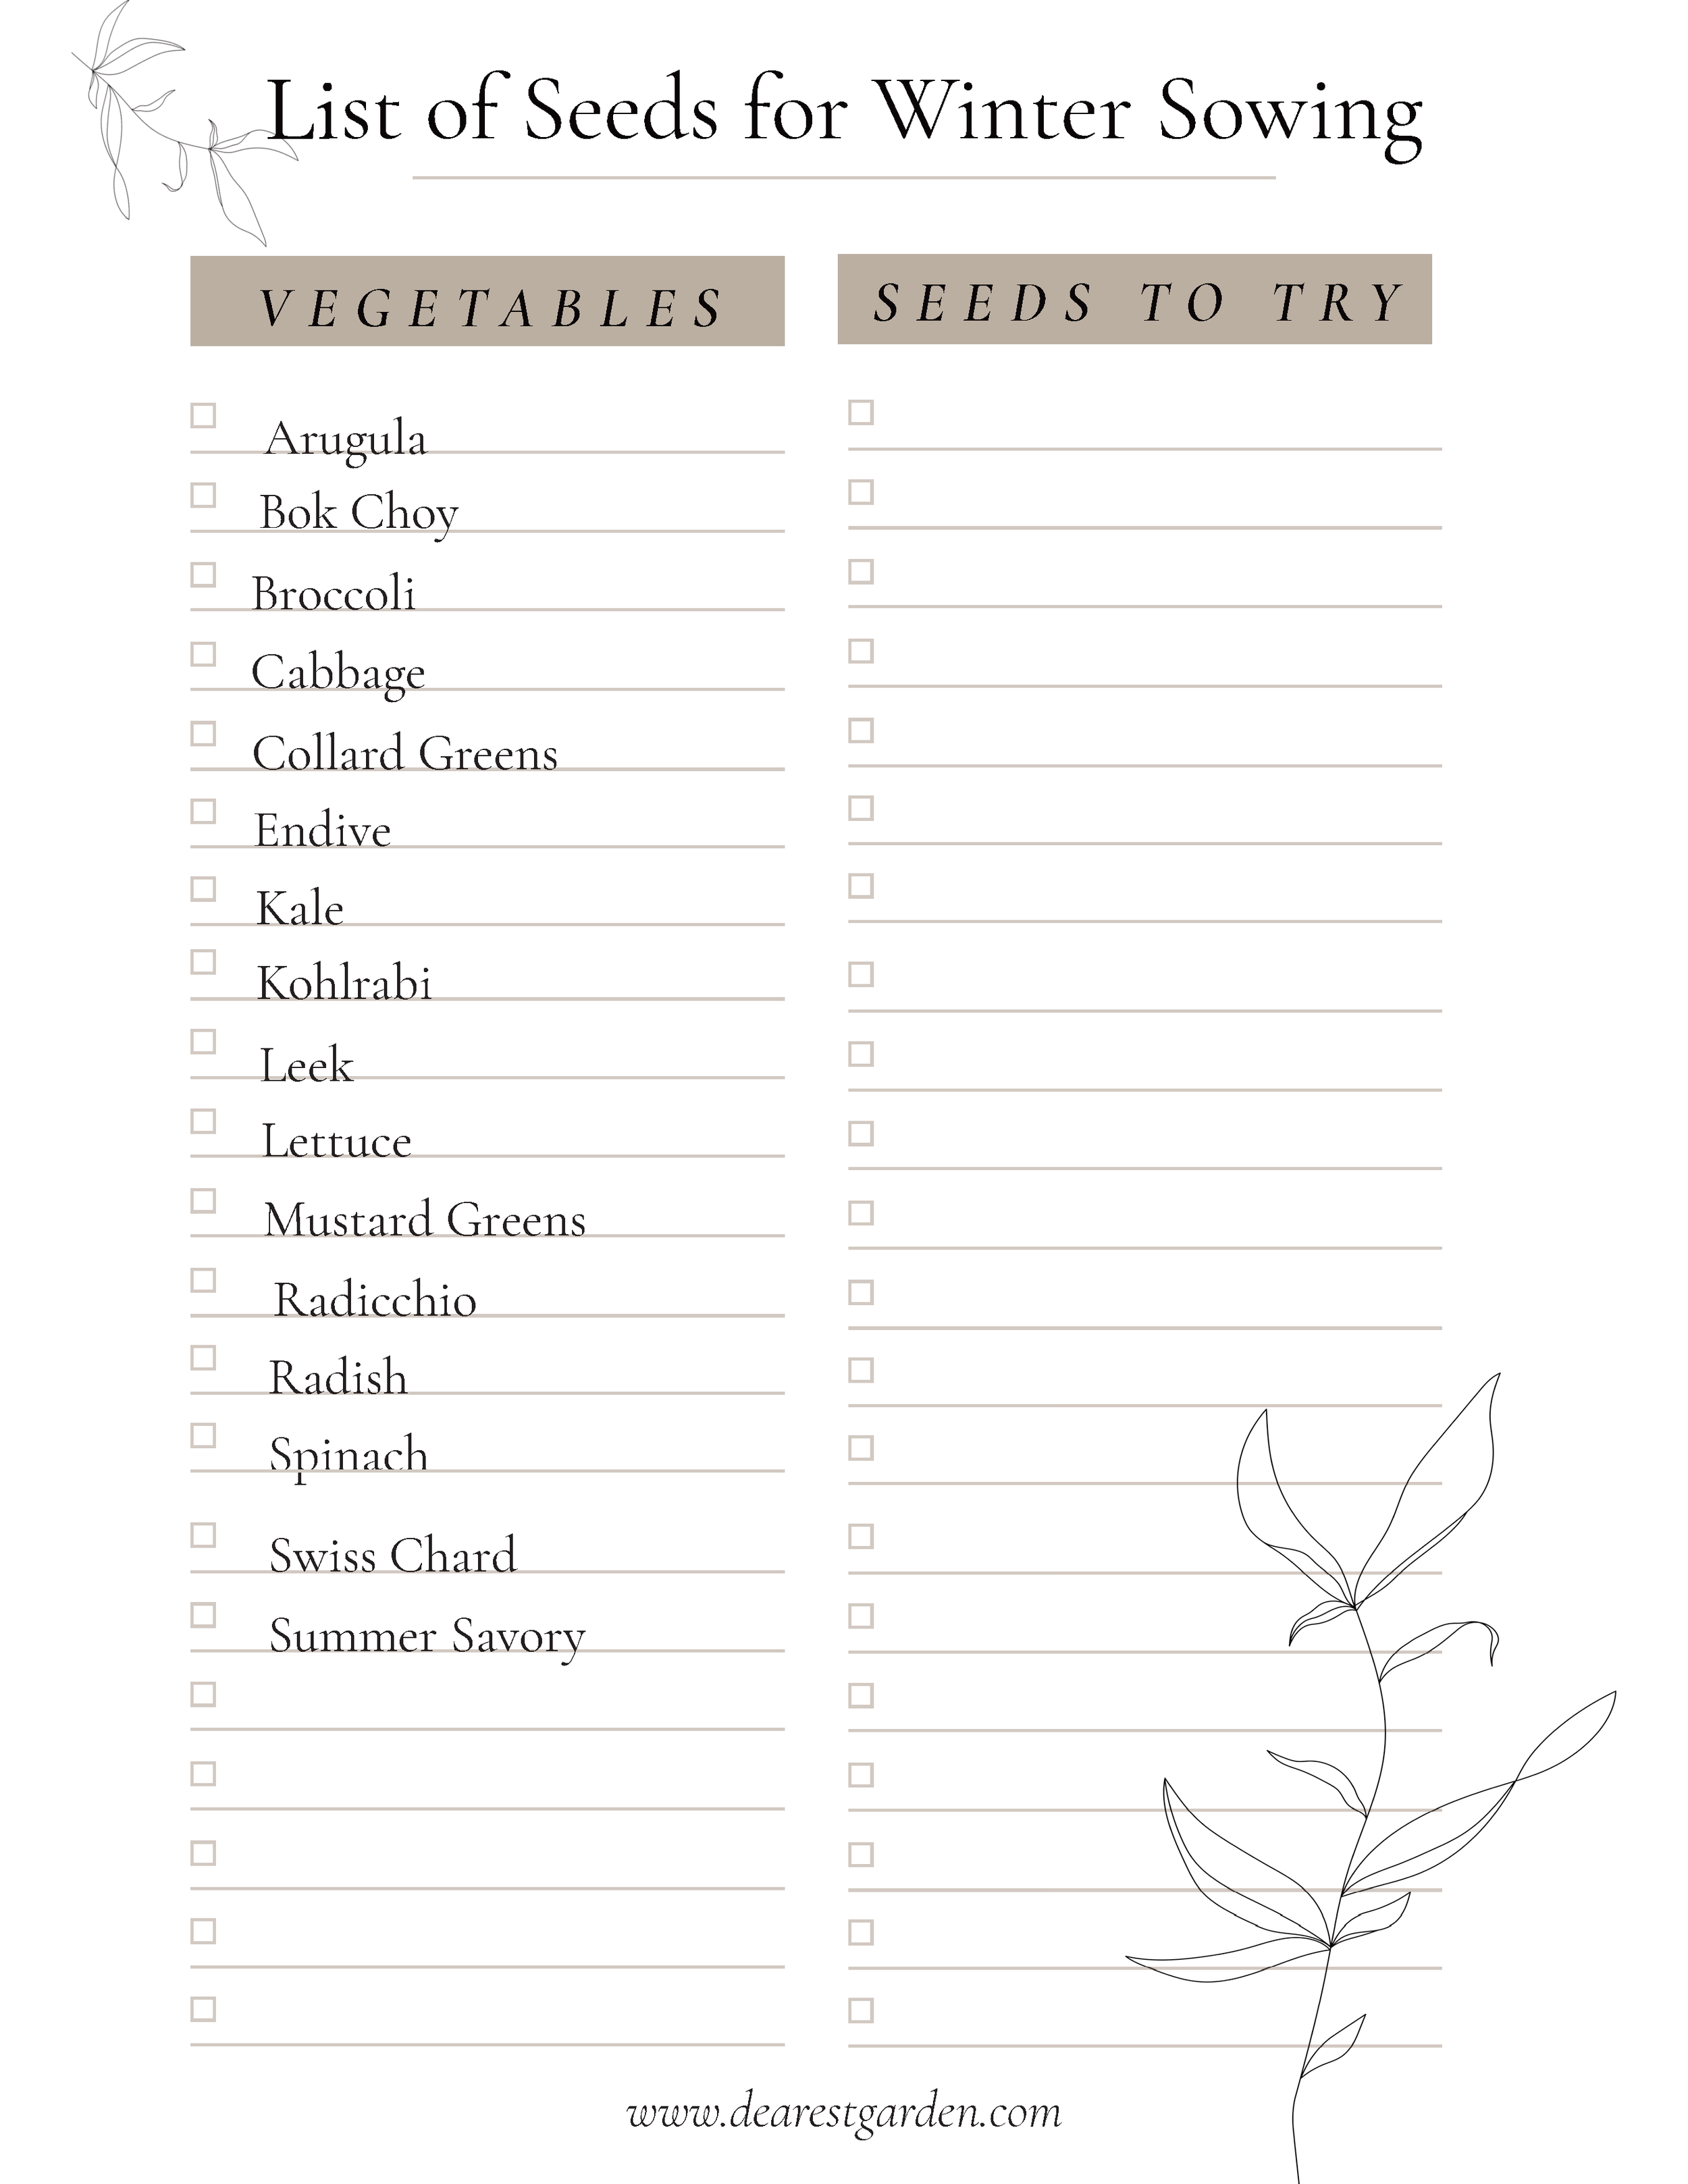 Seeds for Winter Sowing Check List final_Page_2.png